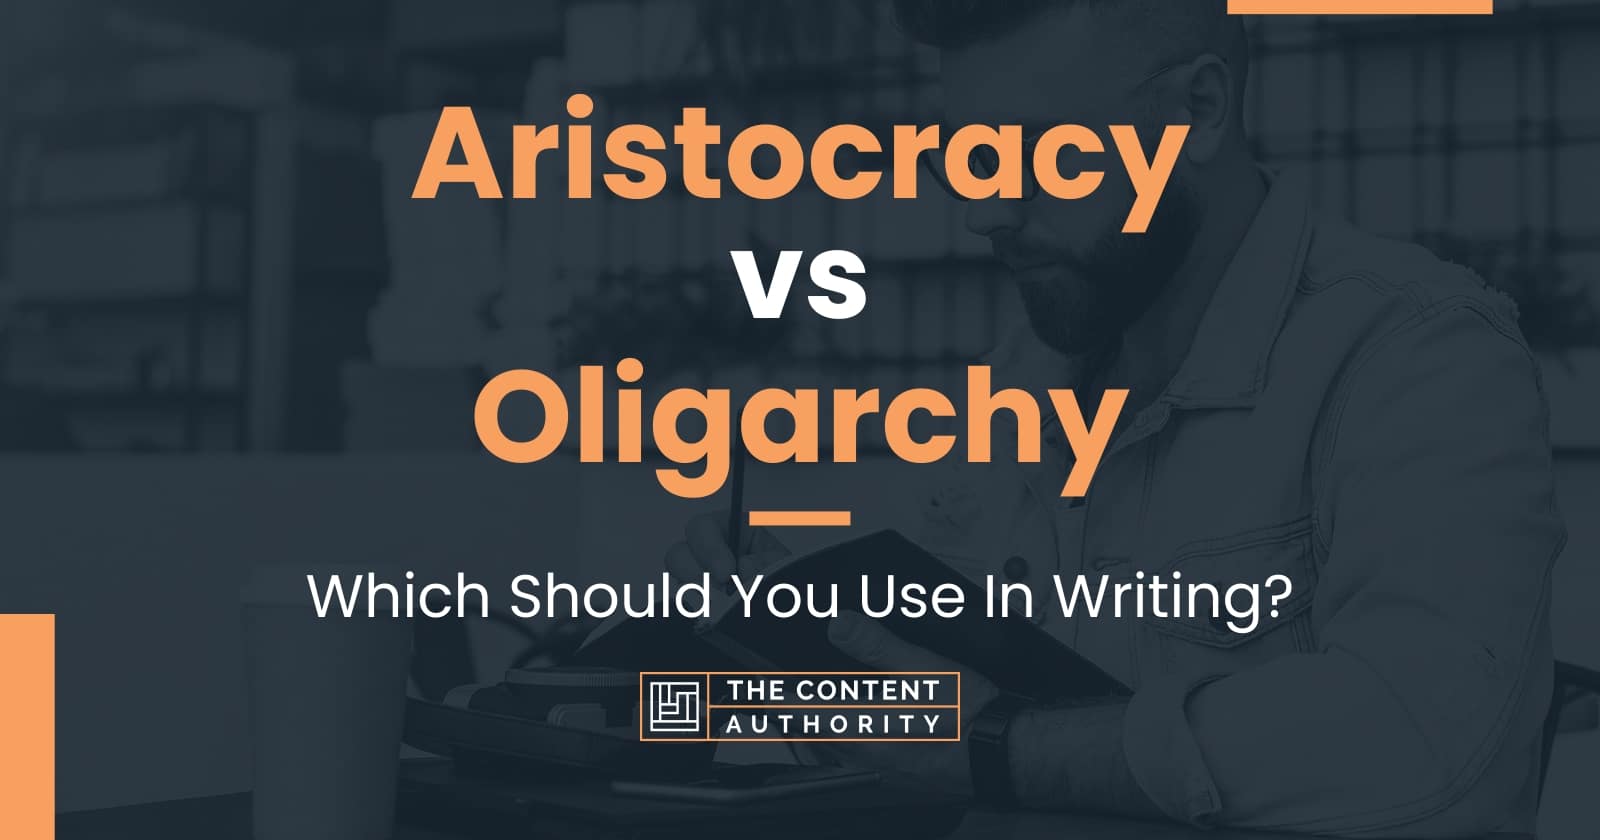 Aristocracy vs Oligarchy: Which Should You Use In Writing?